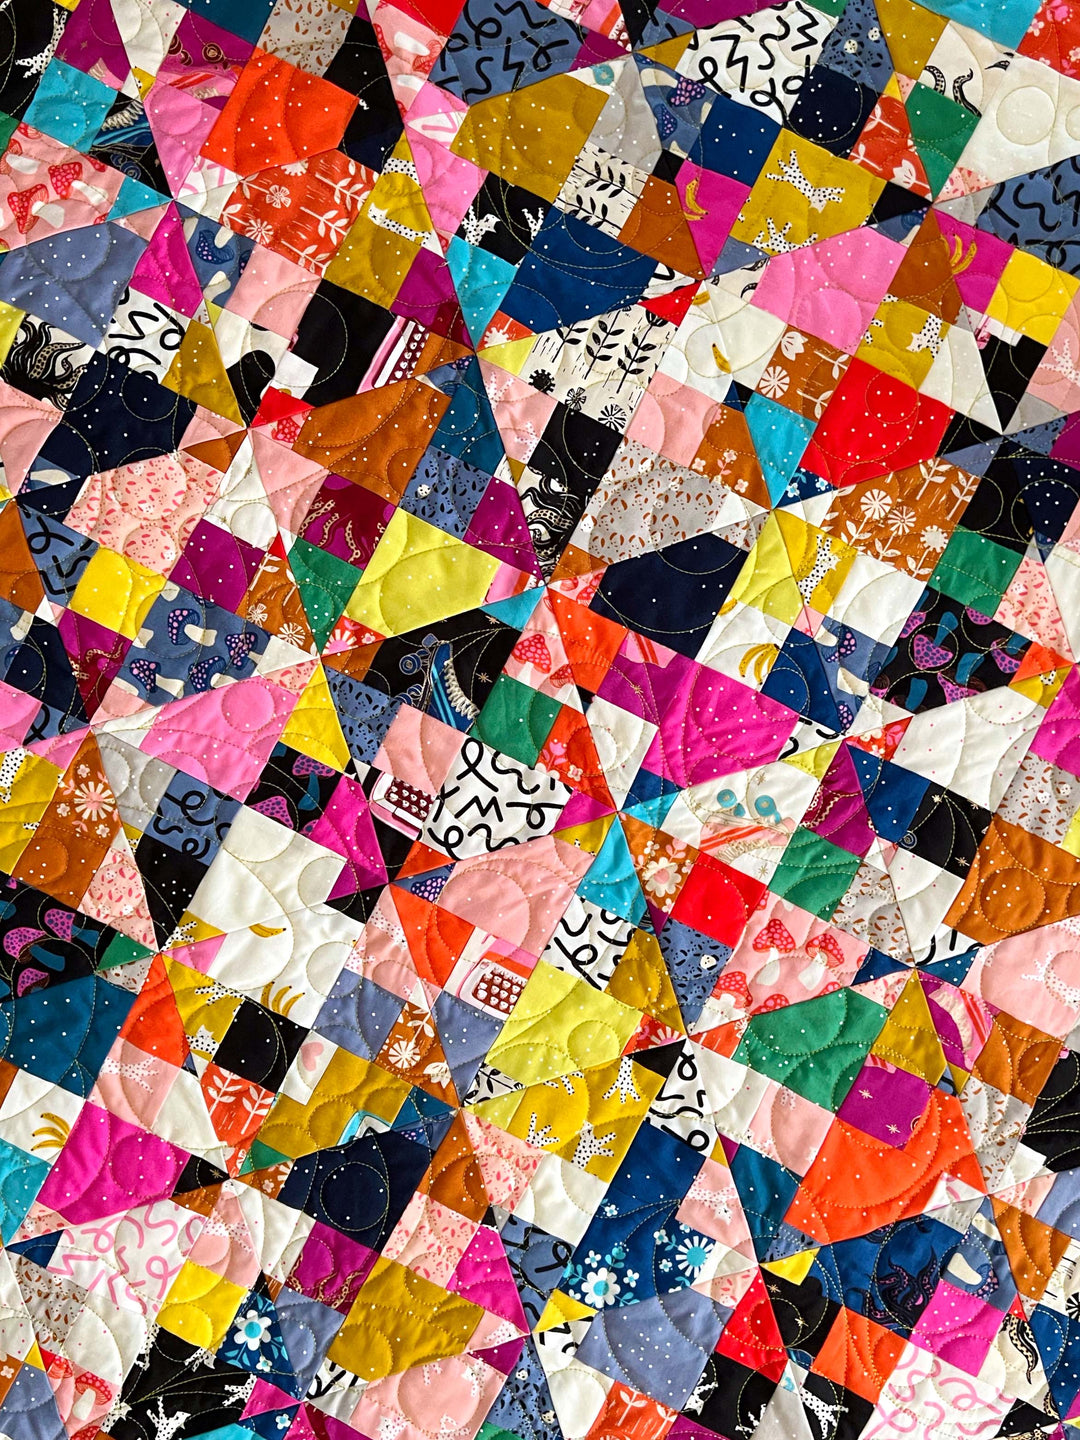 Utter Chaos Quilt closeup detail of quilting and blocks